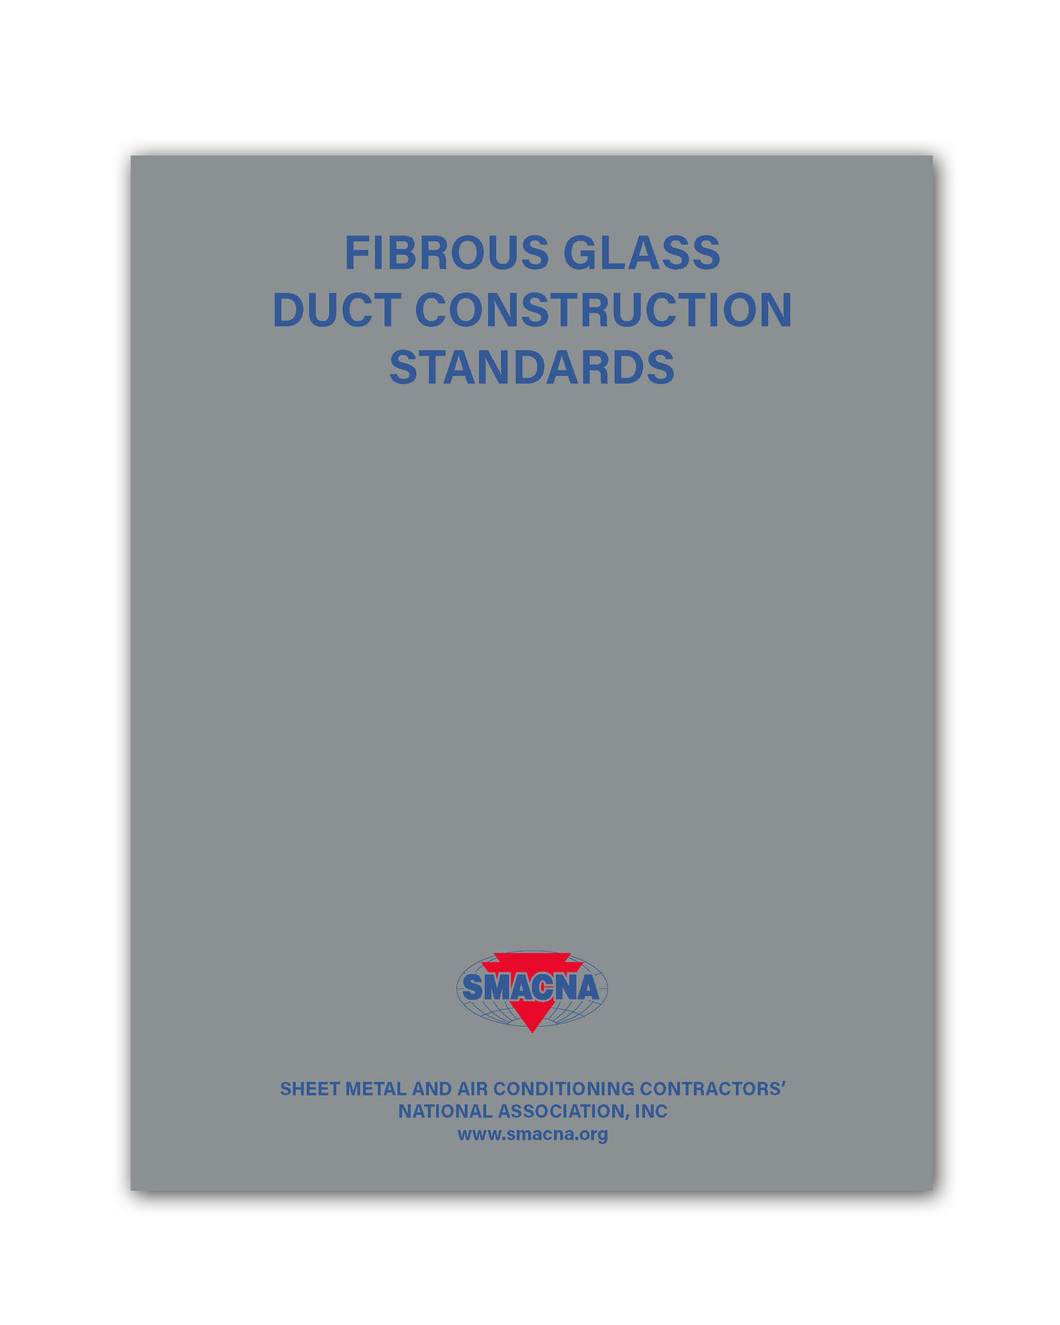 Fibrous Glass Duct Construction Standards, 8th Edition